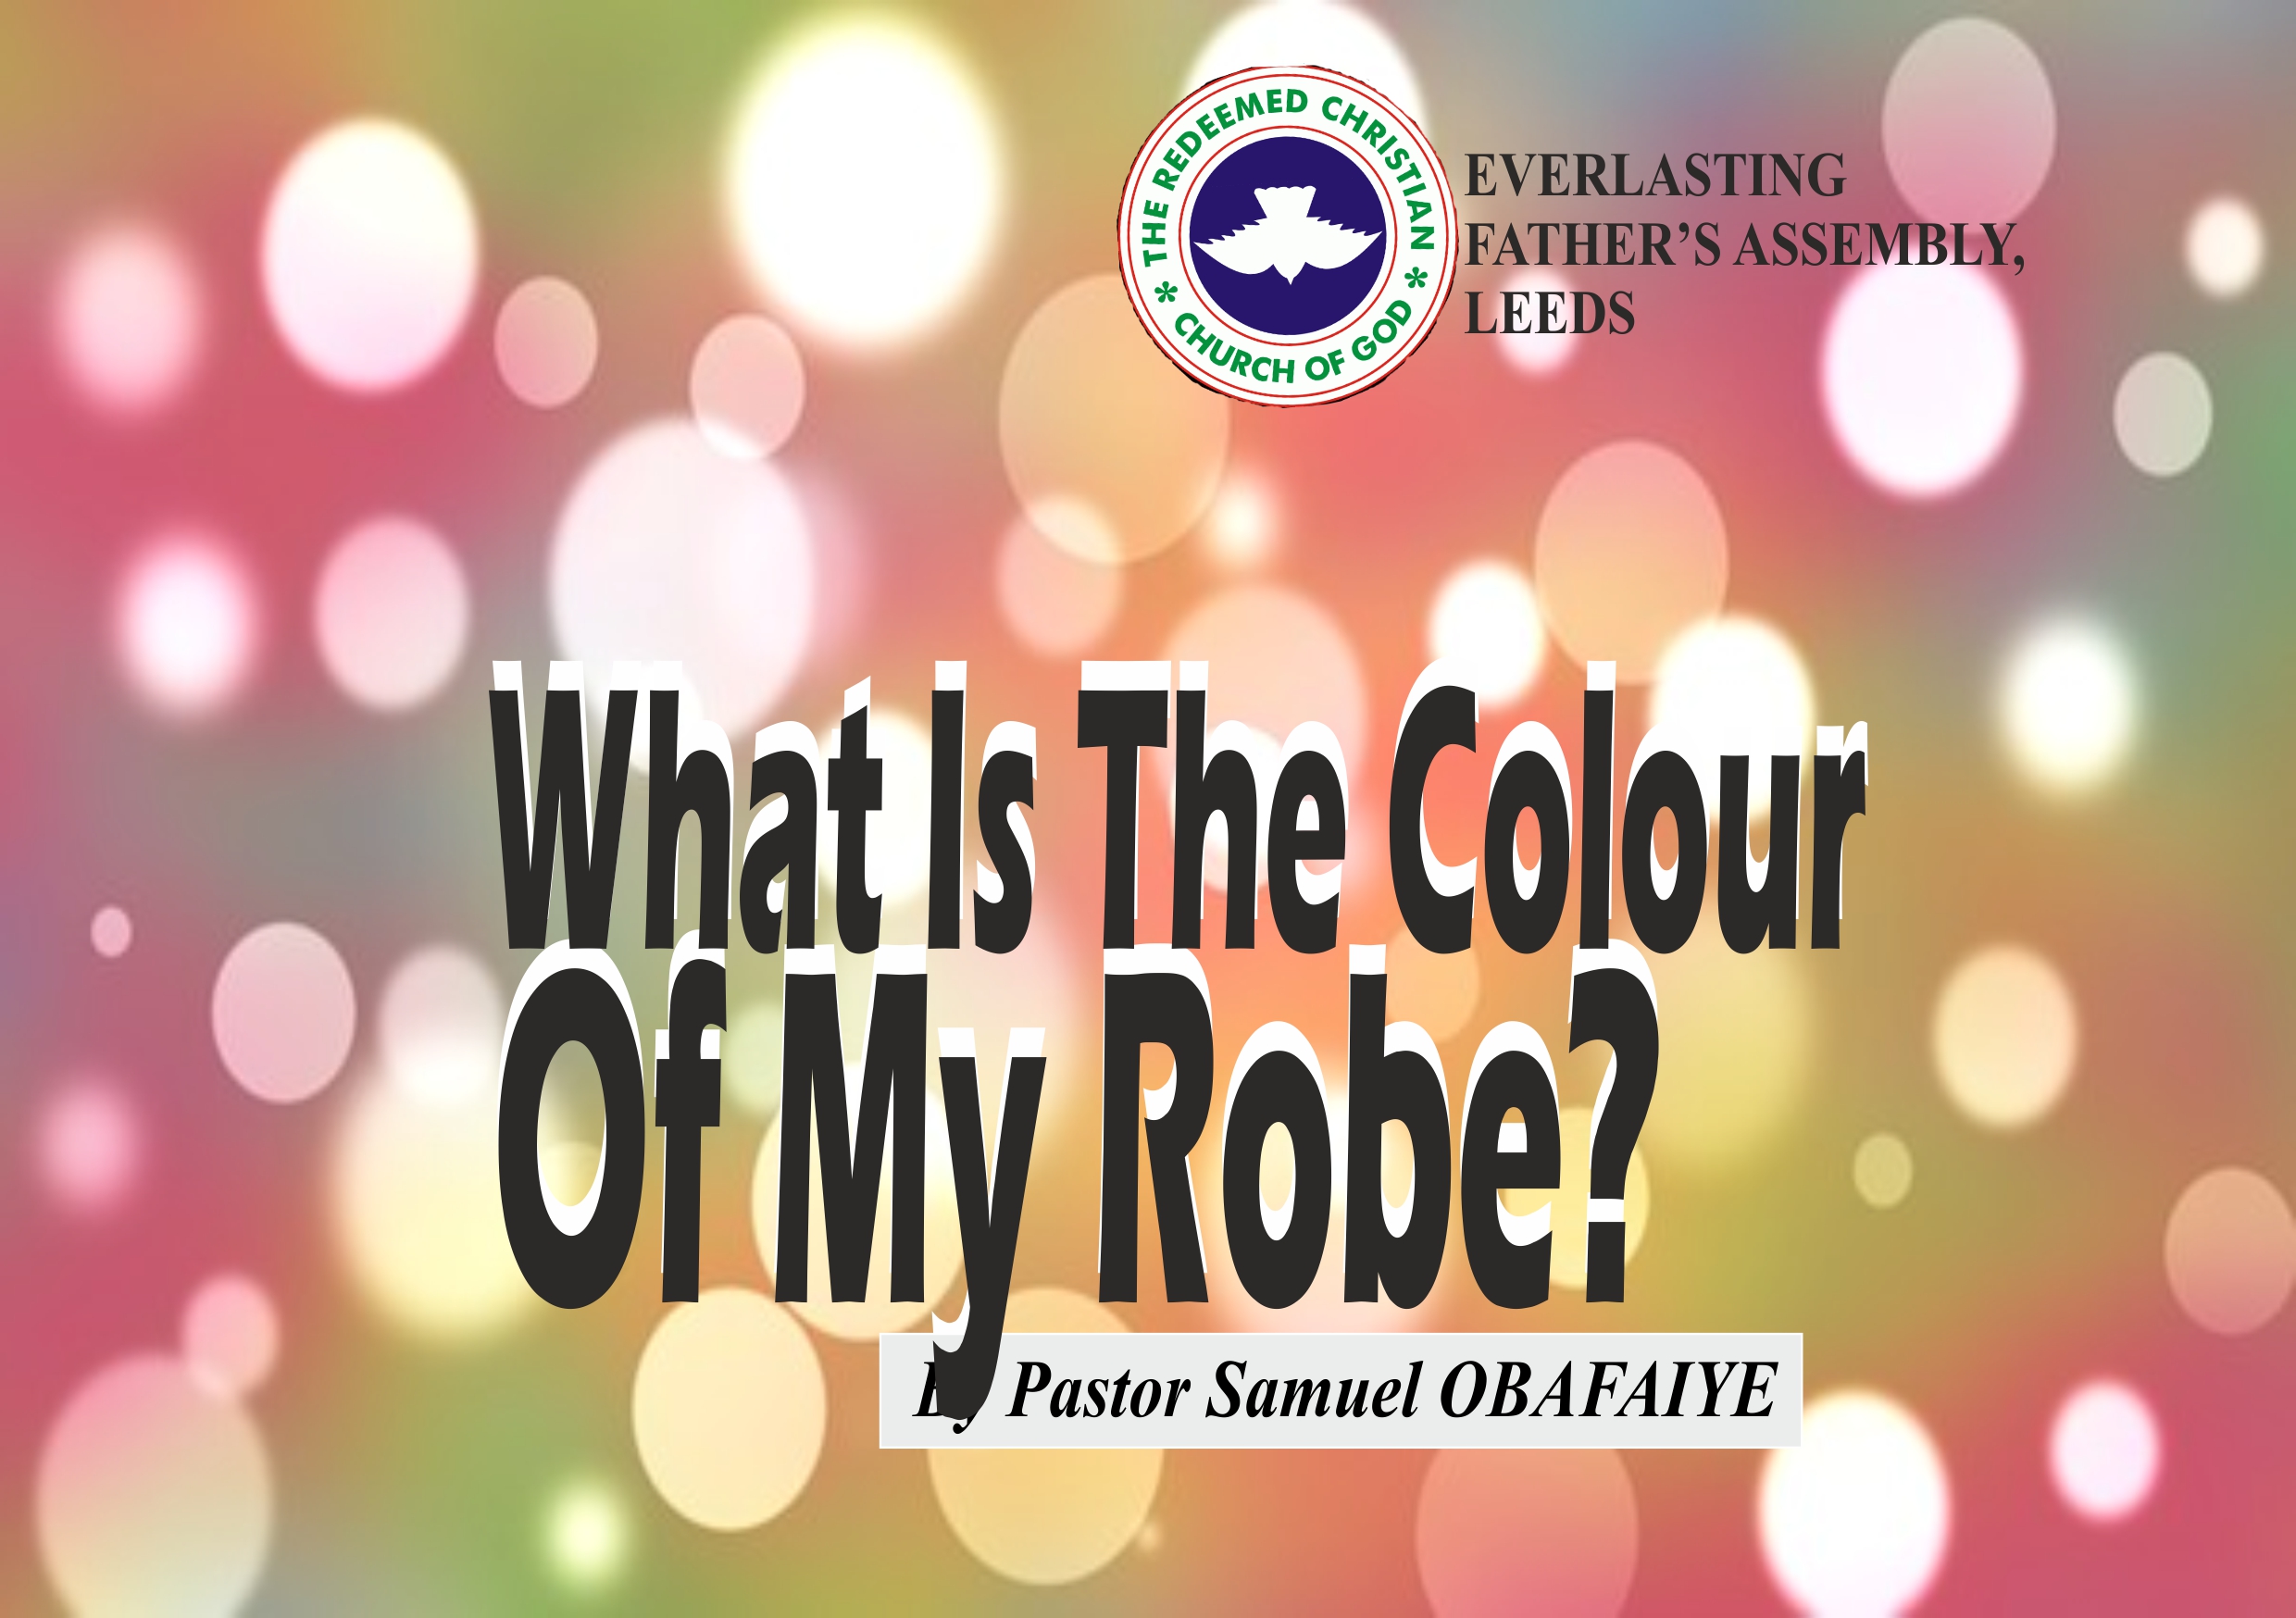 What Is The Colour Of My Robe? by Pastor Samuel Obafaiye